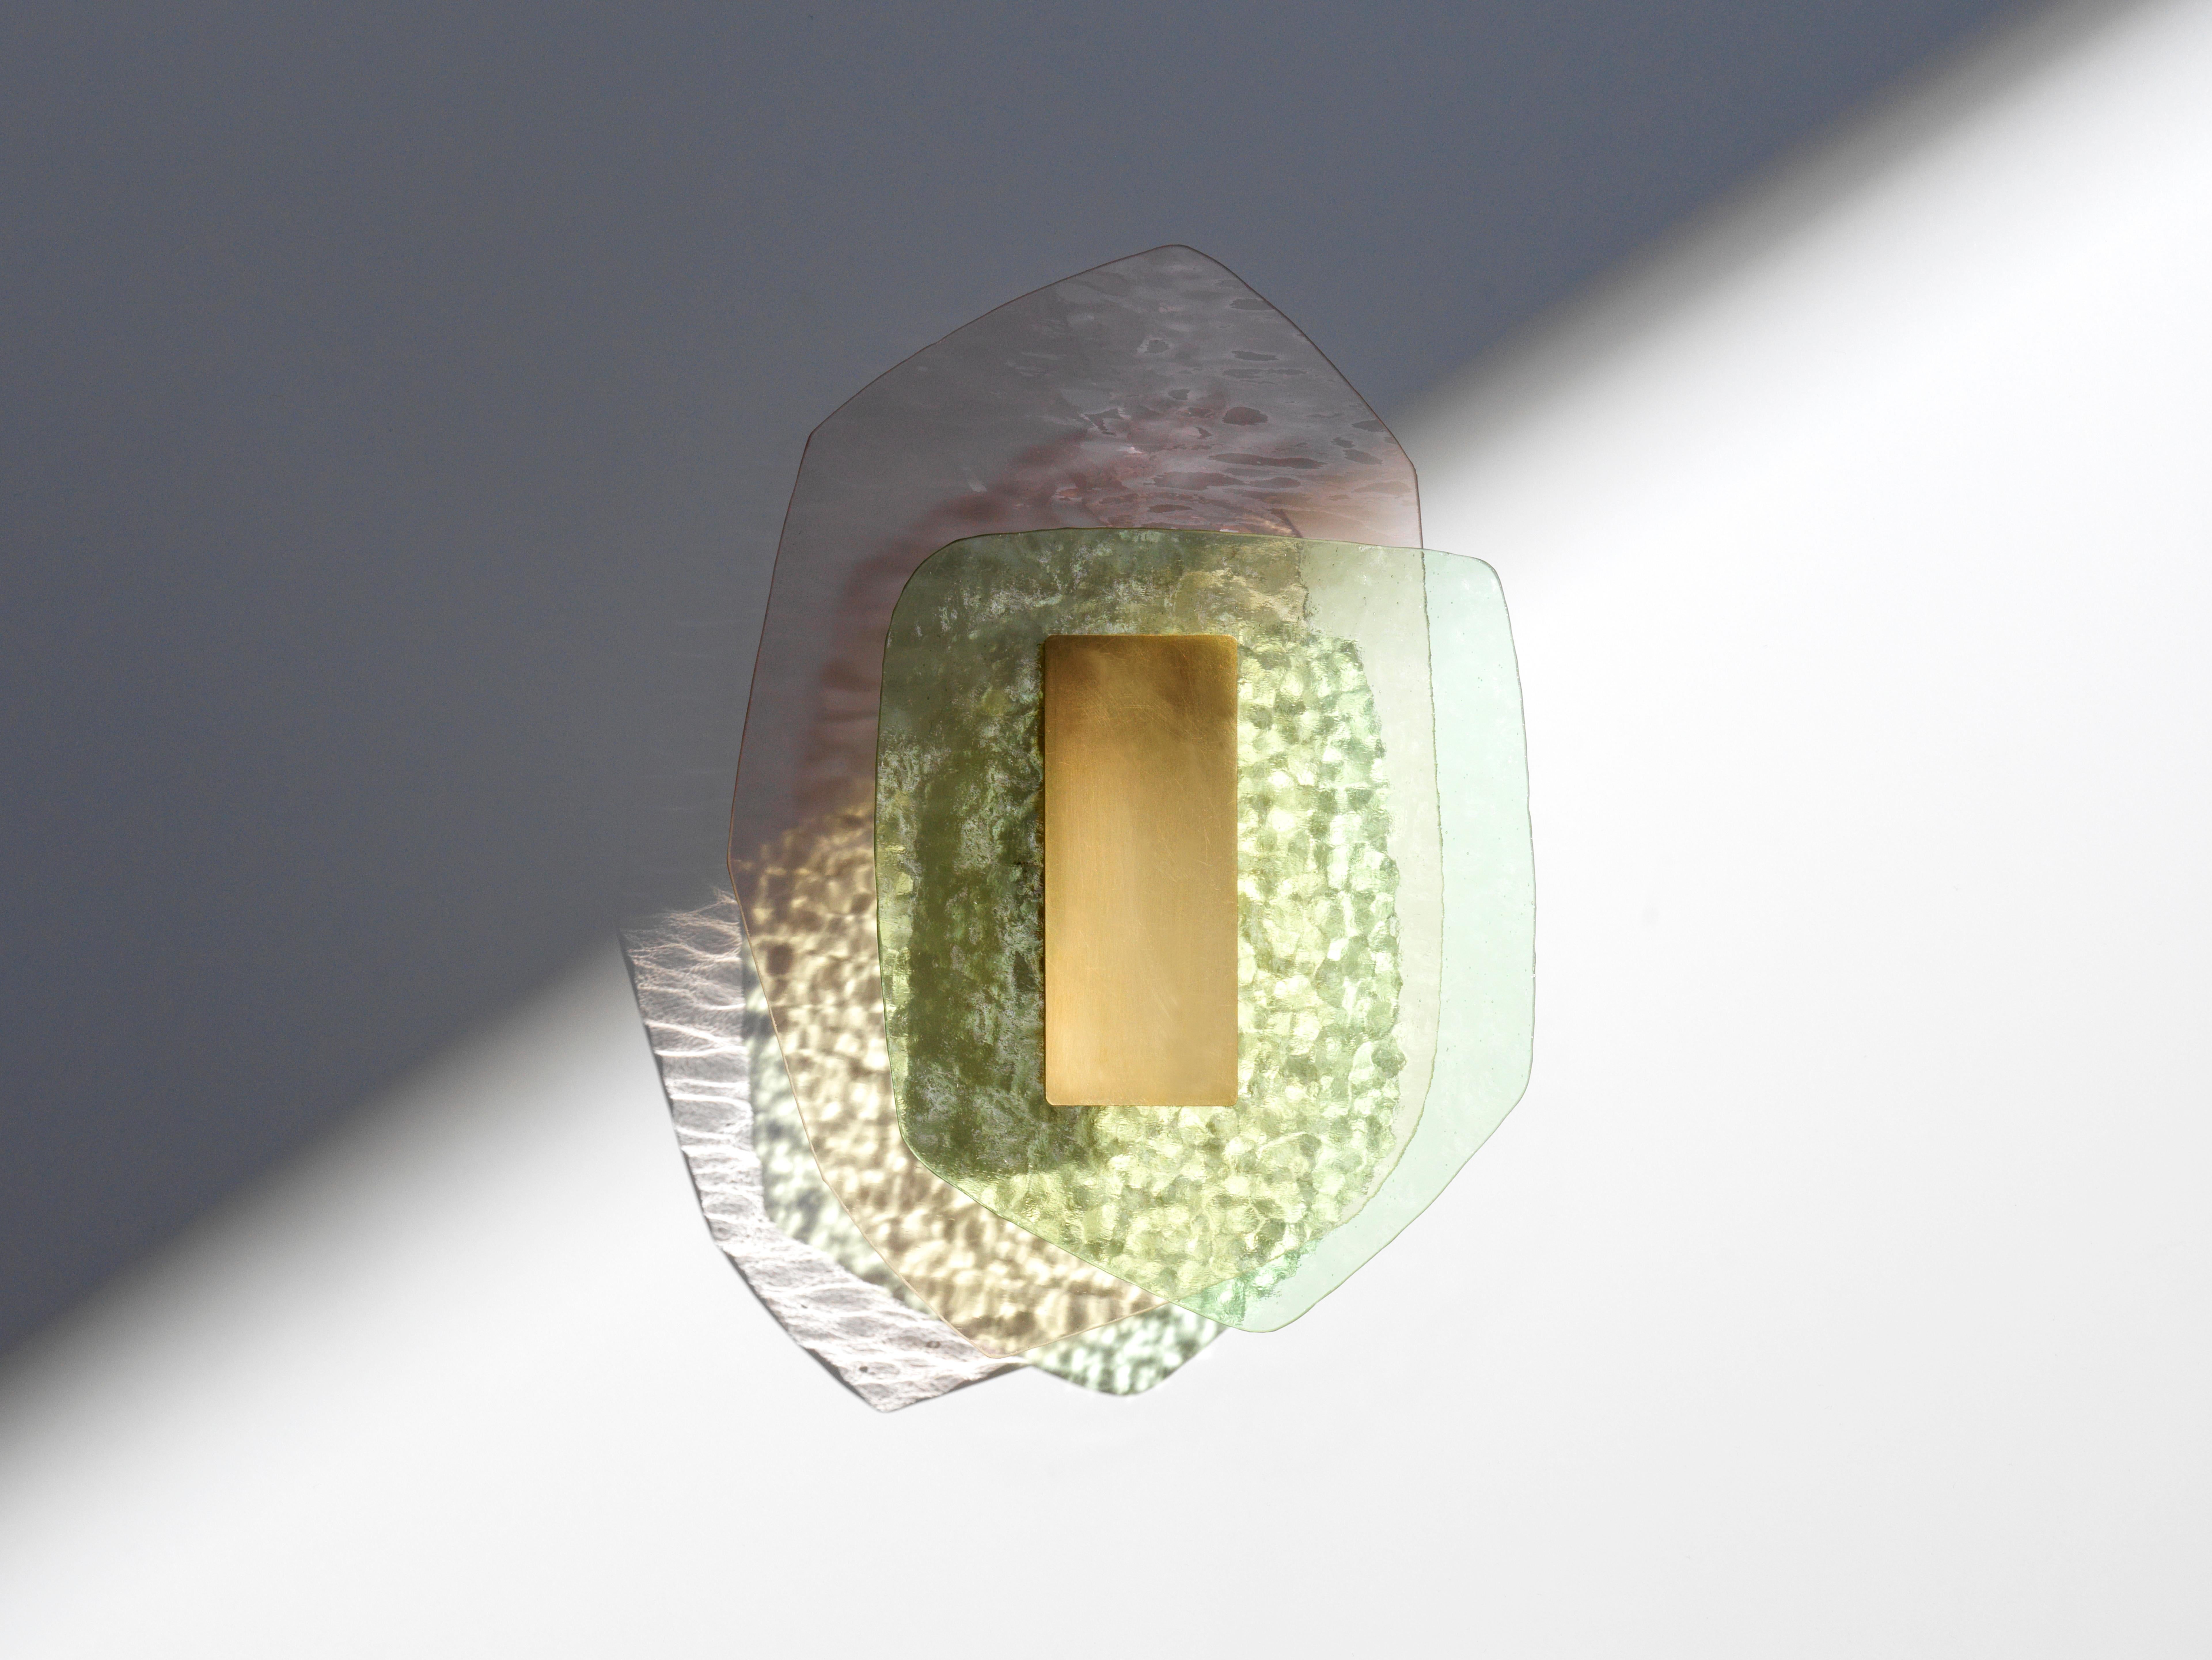 Unity 02 light sculpture by Marie Jeunet
Dimensions: H 37.5 x L 27.5 cm
Materials: Champagne pink wave glass sheet, green water hammered glass sheet, brushed brass structure and finish

LES PRECIEUX 
These luminous sculptures evolve with the